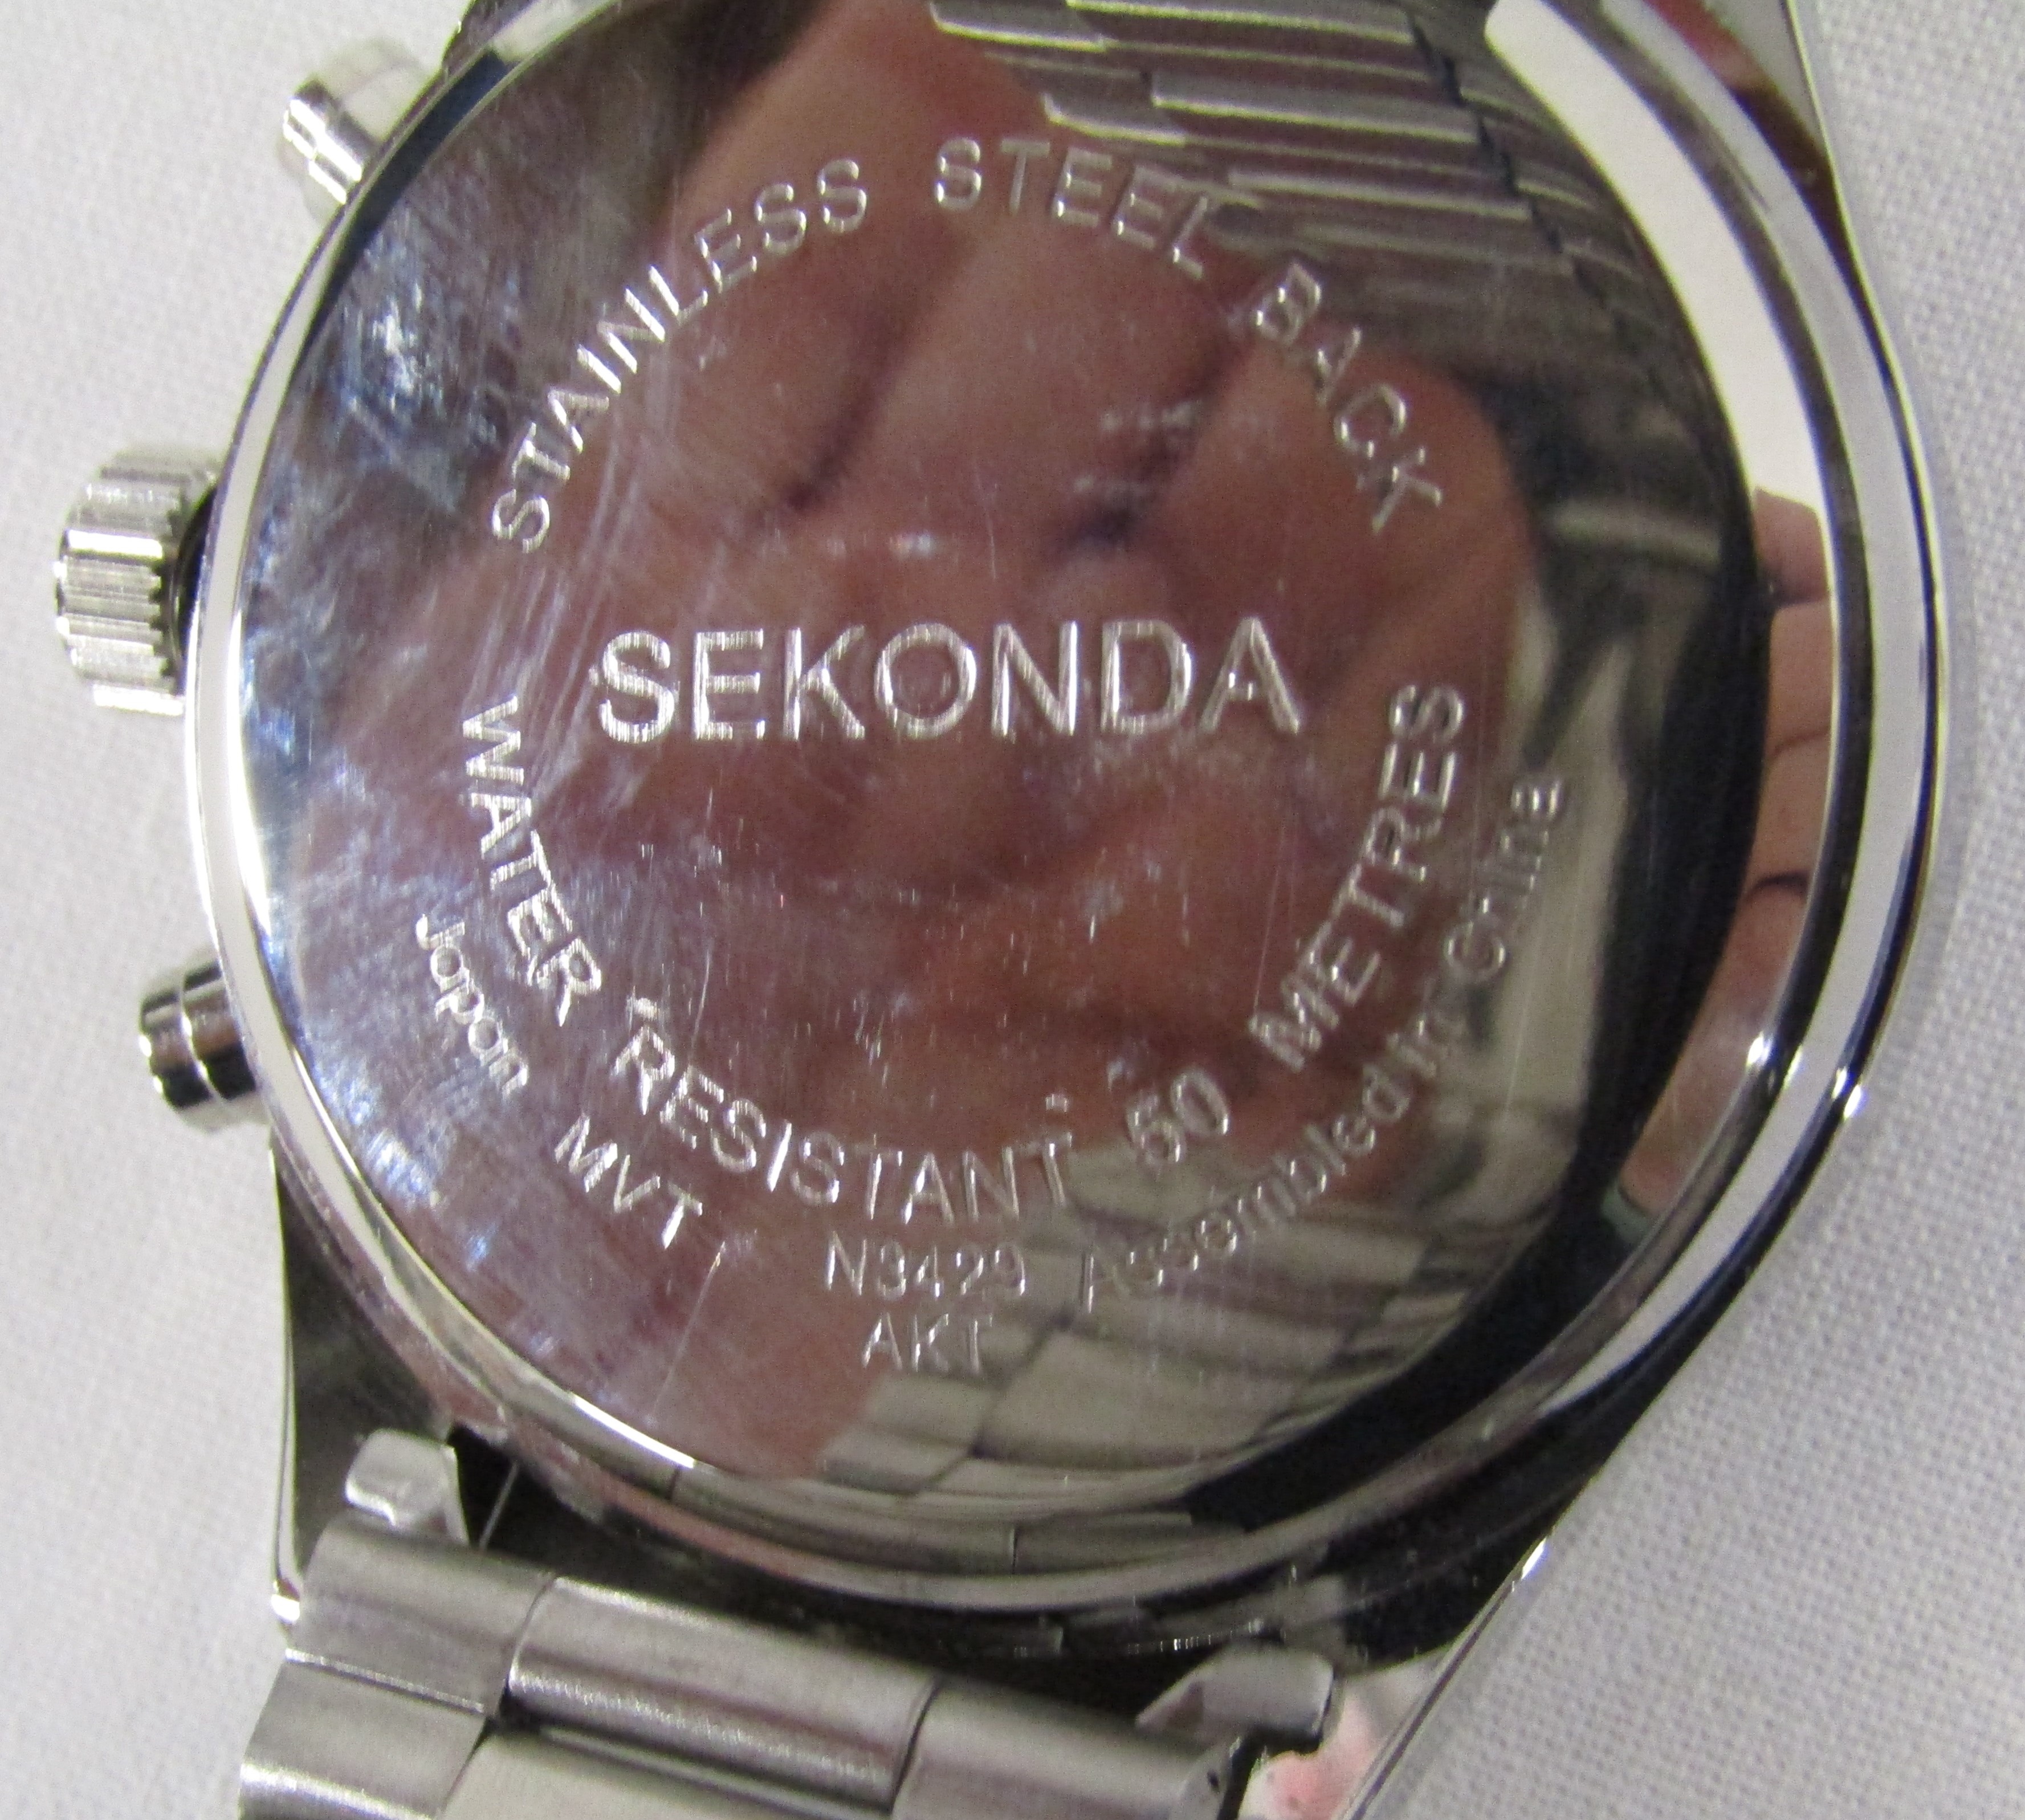 6 men's Sekonda watches - 1525 digital, 03405 with date, 3846 with date, 3407H chronograph, N3490 - Image 13 of 13